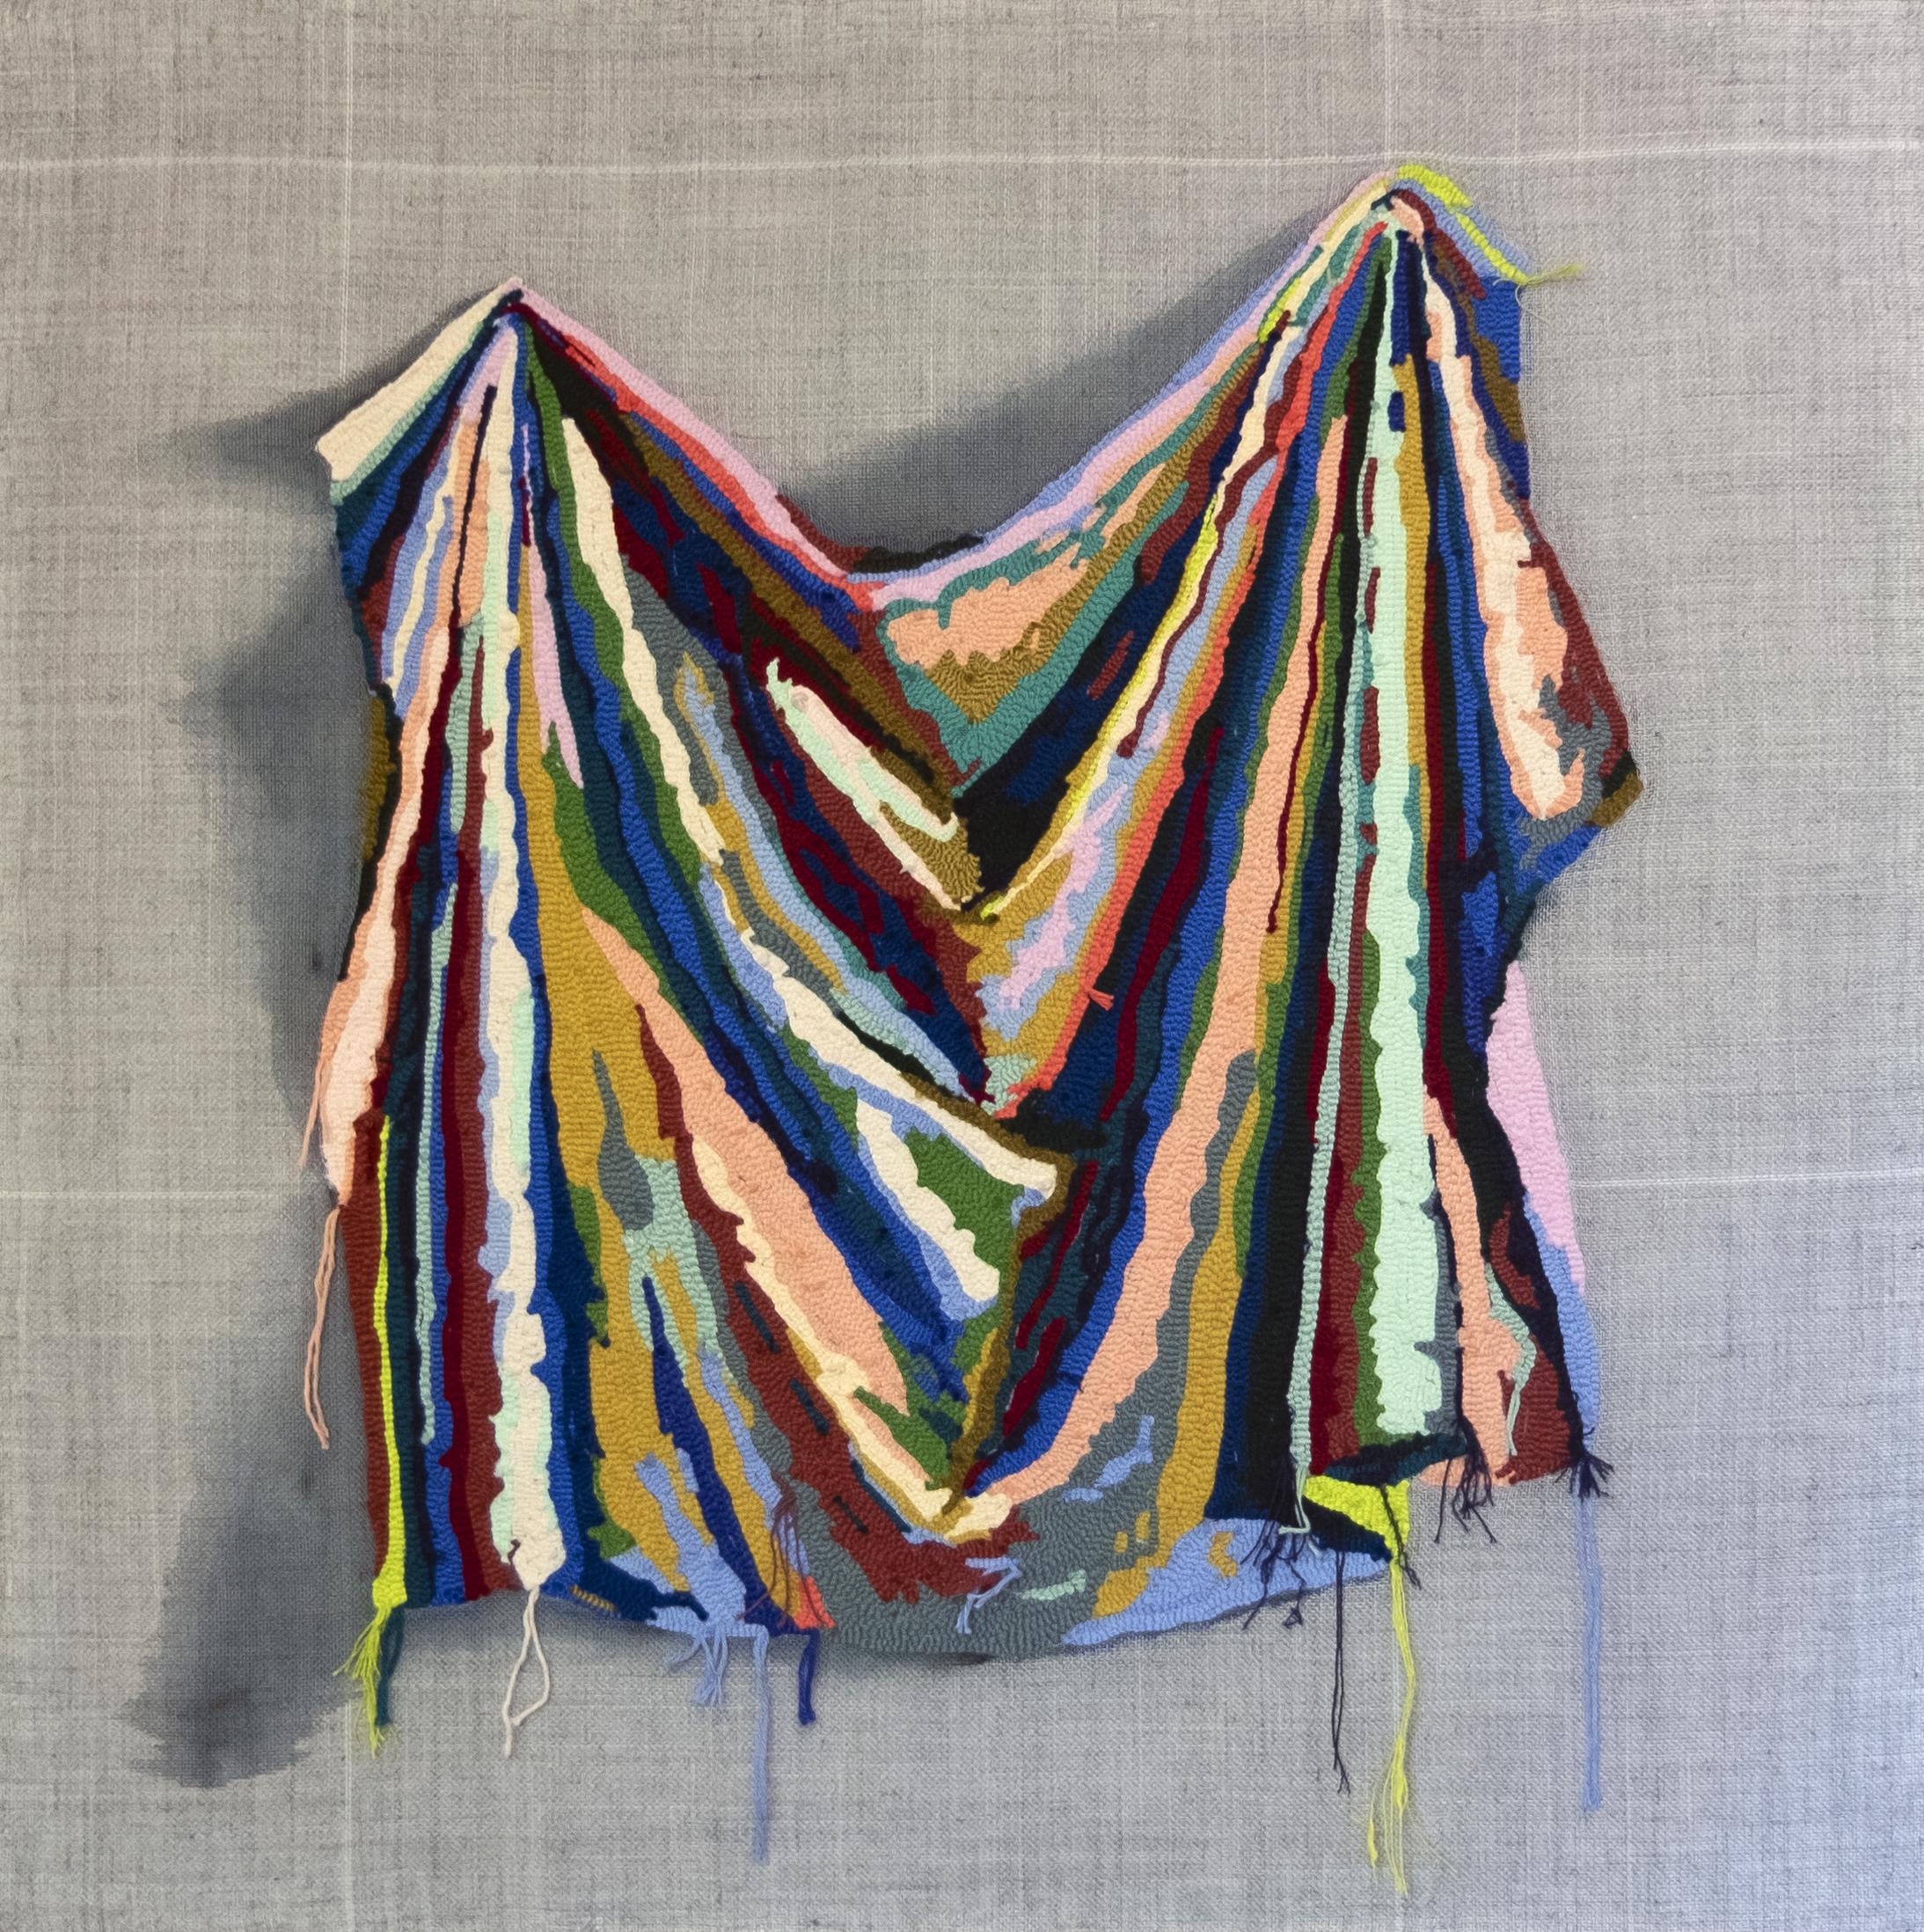 "Open" - contemporary fiber art - tufting - colorful - Trompe-l'œil - Hicks - Mixed Media Art by Trish Andersen